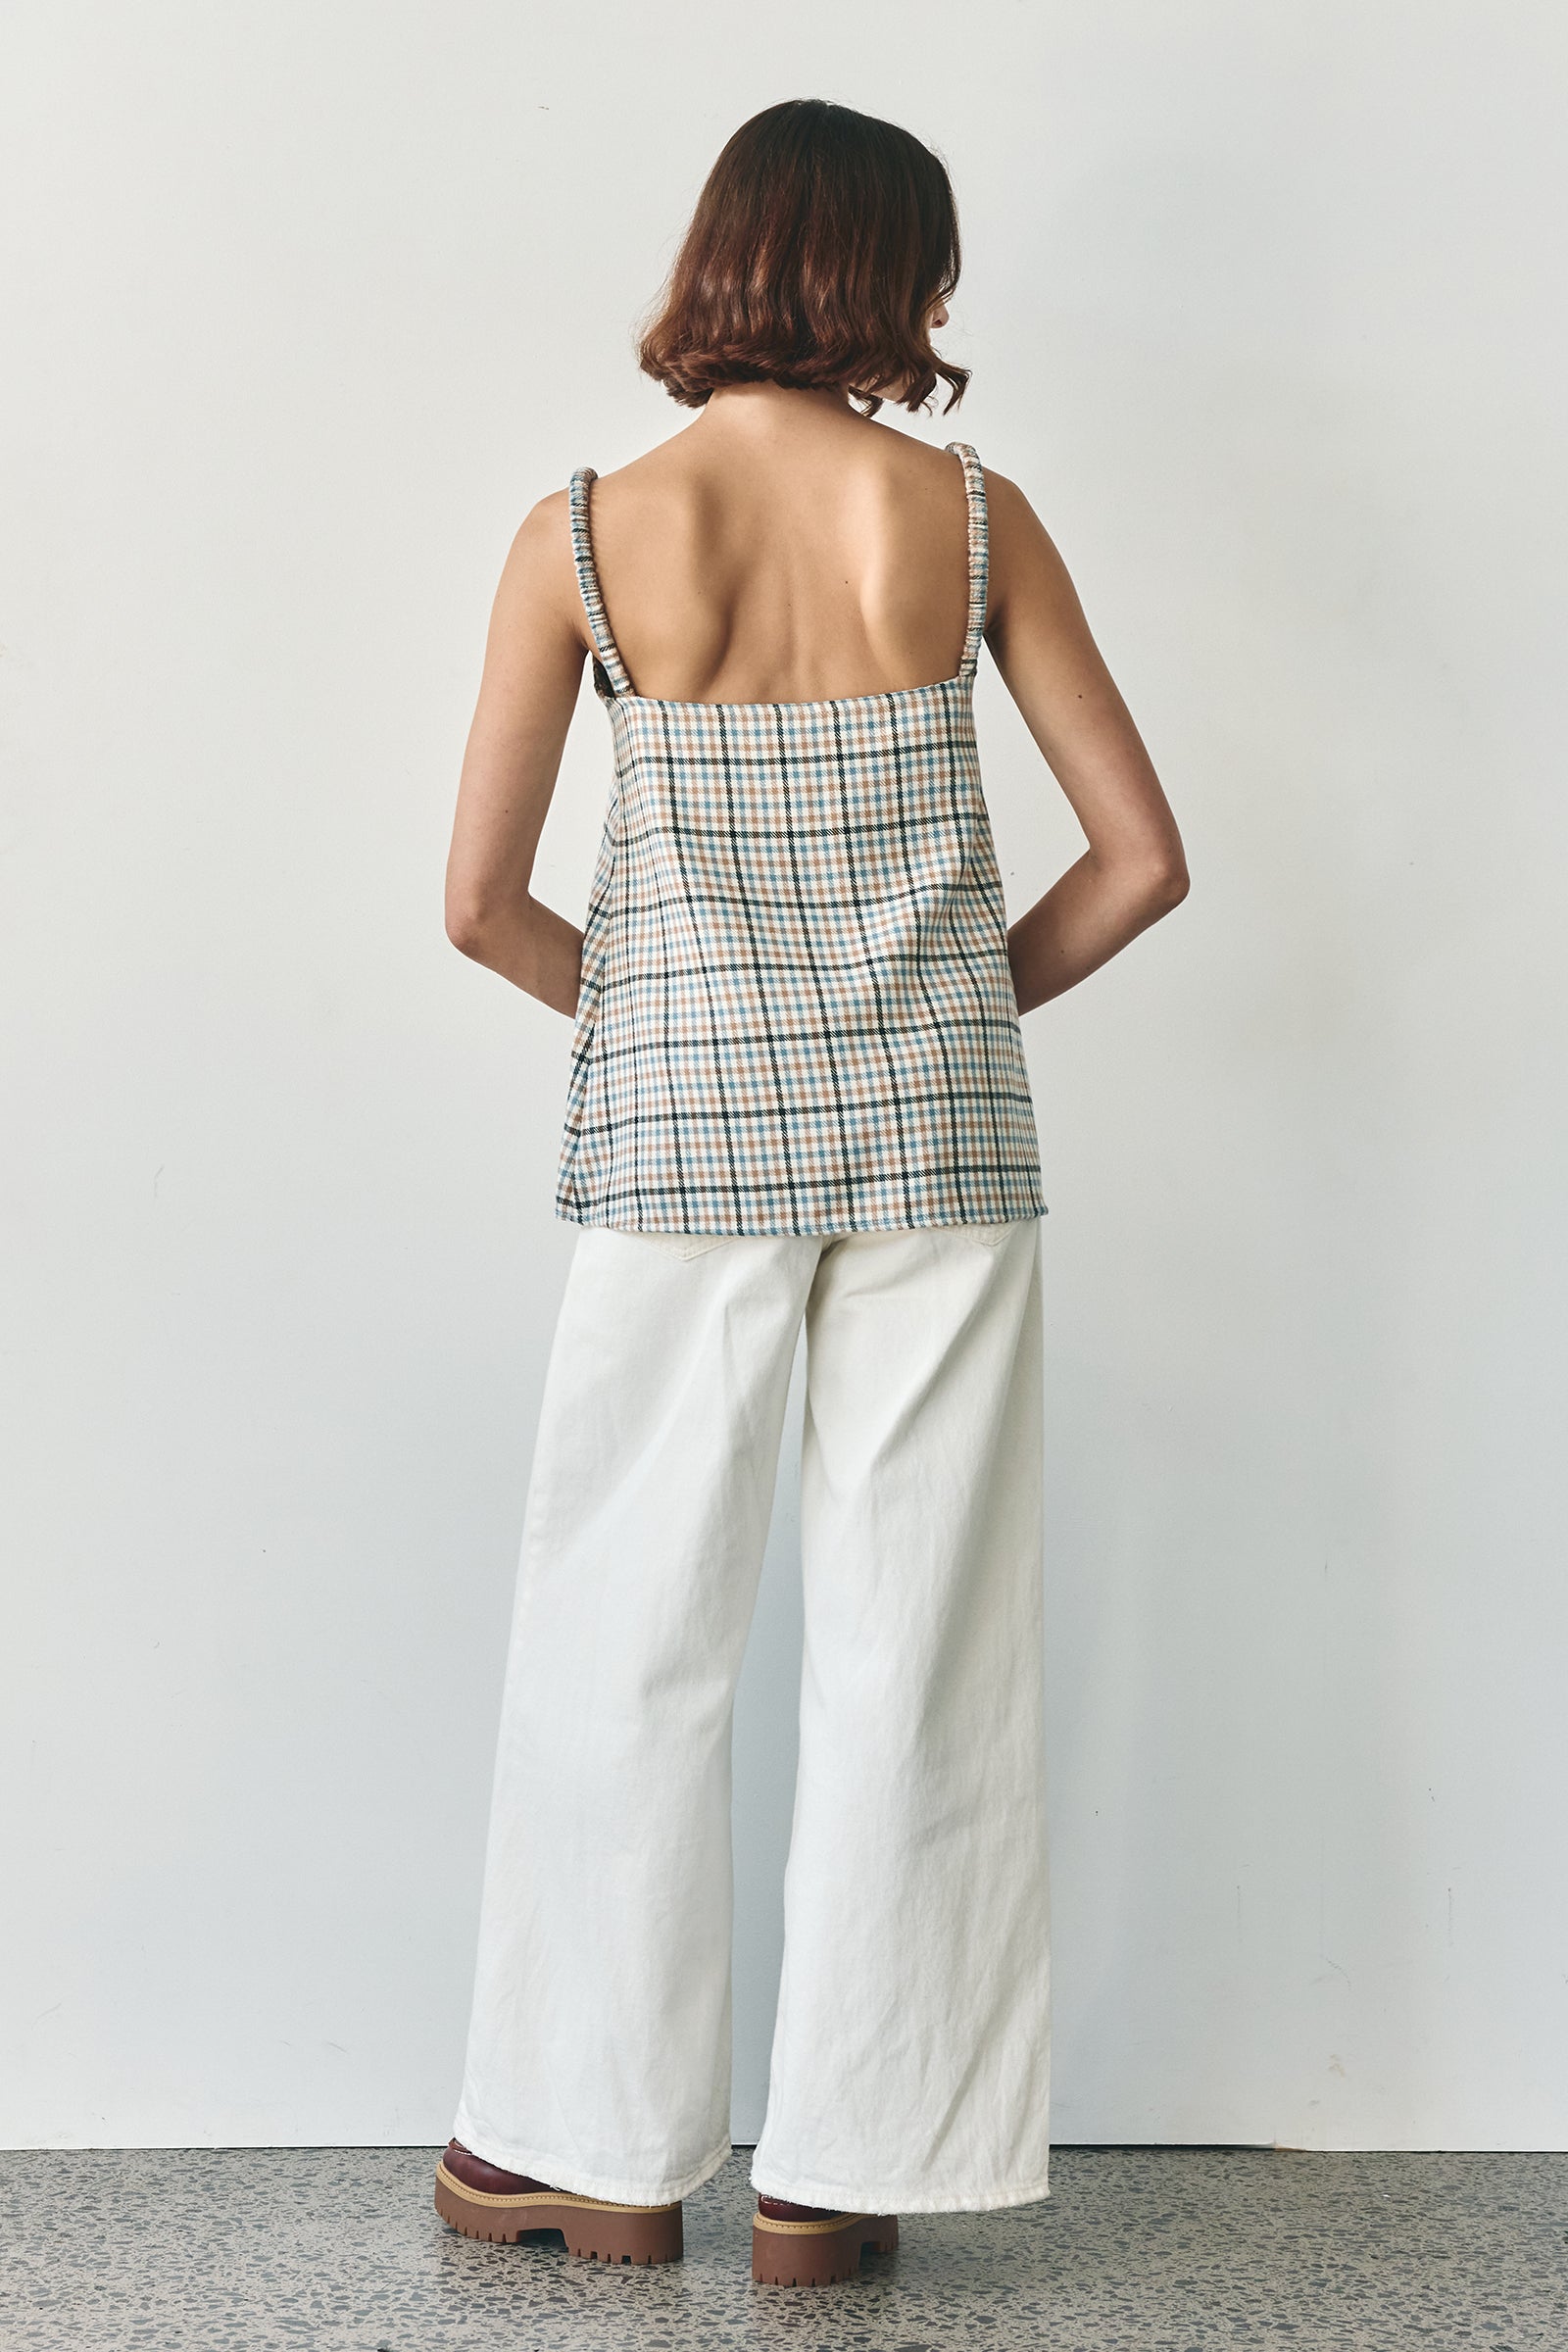 Heart Camisole in Blue Plaid